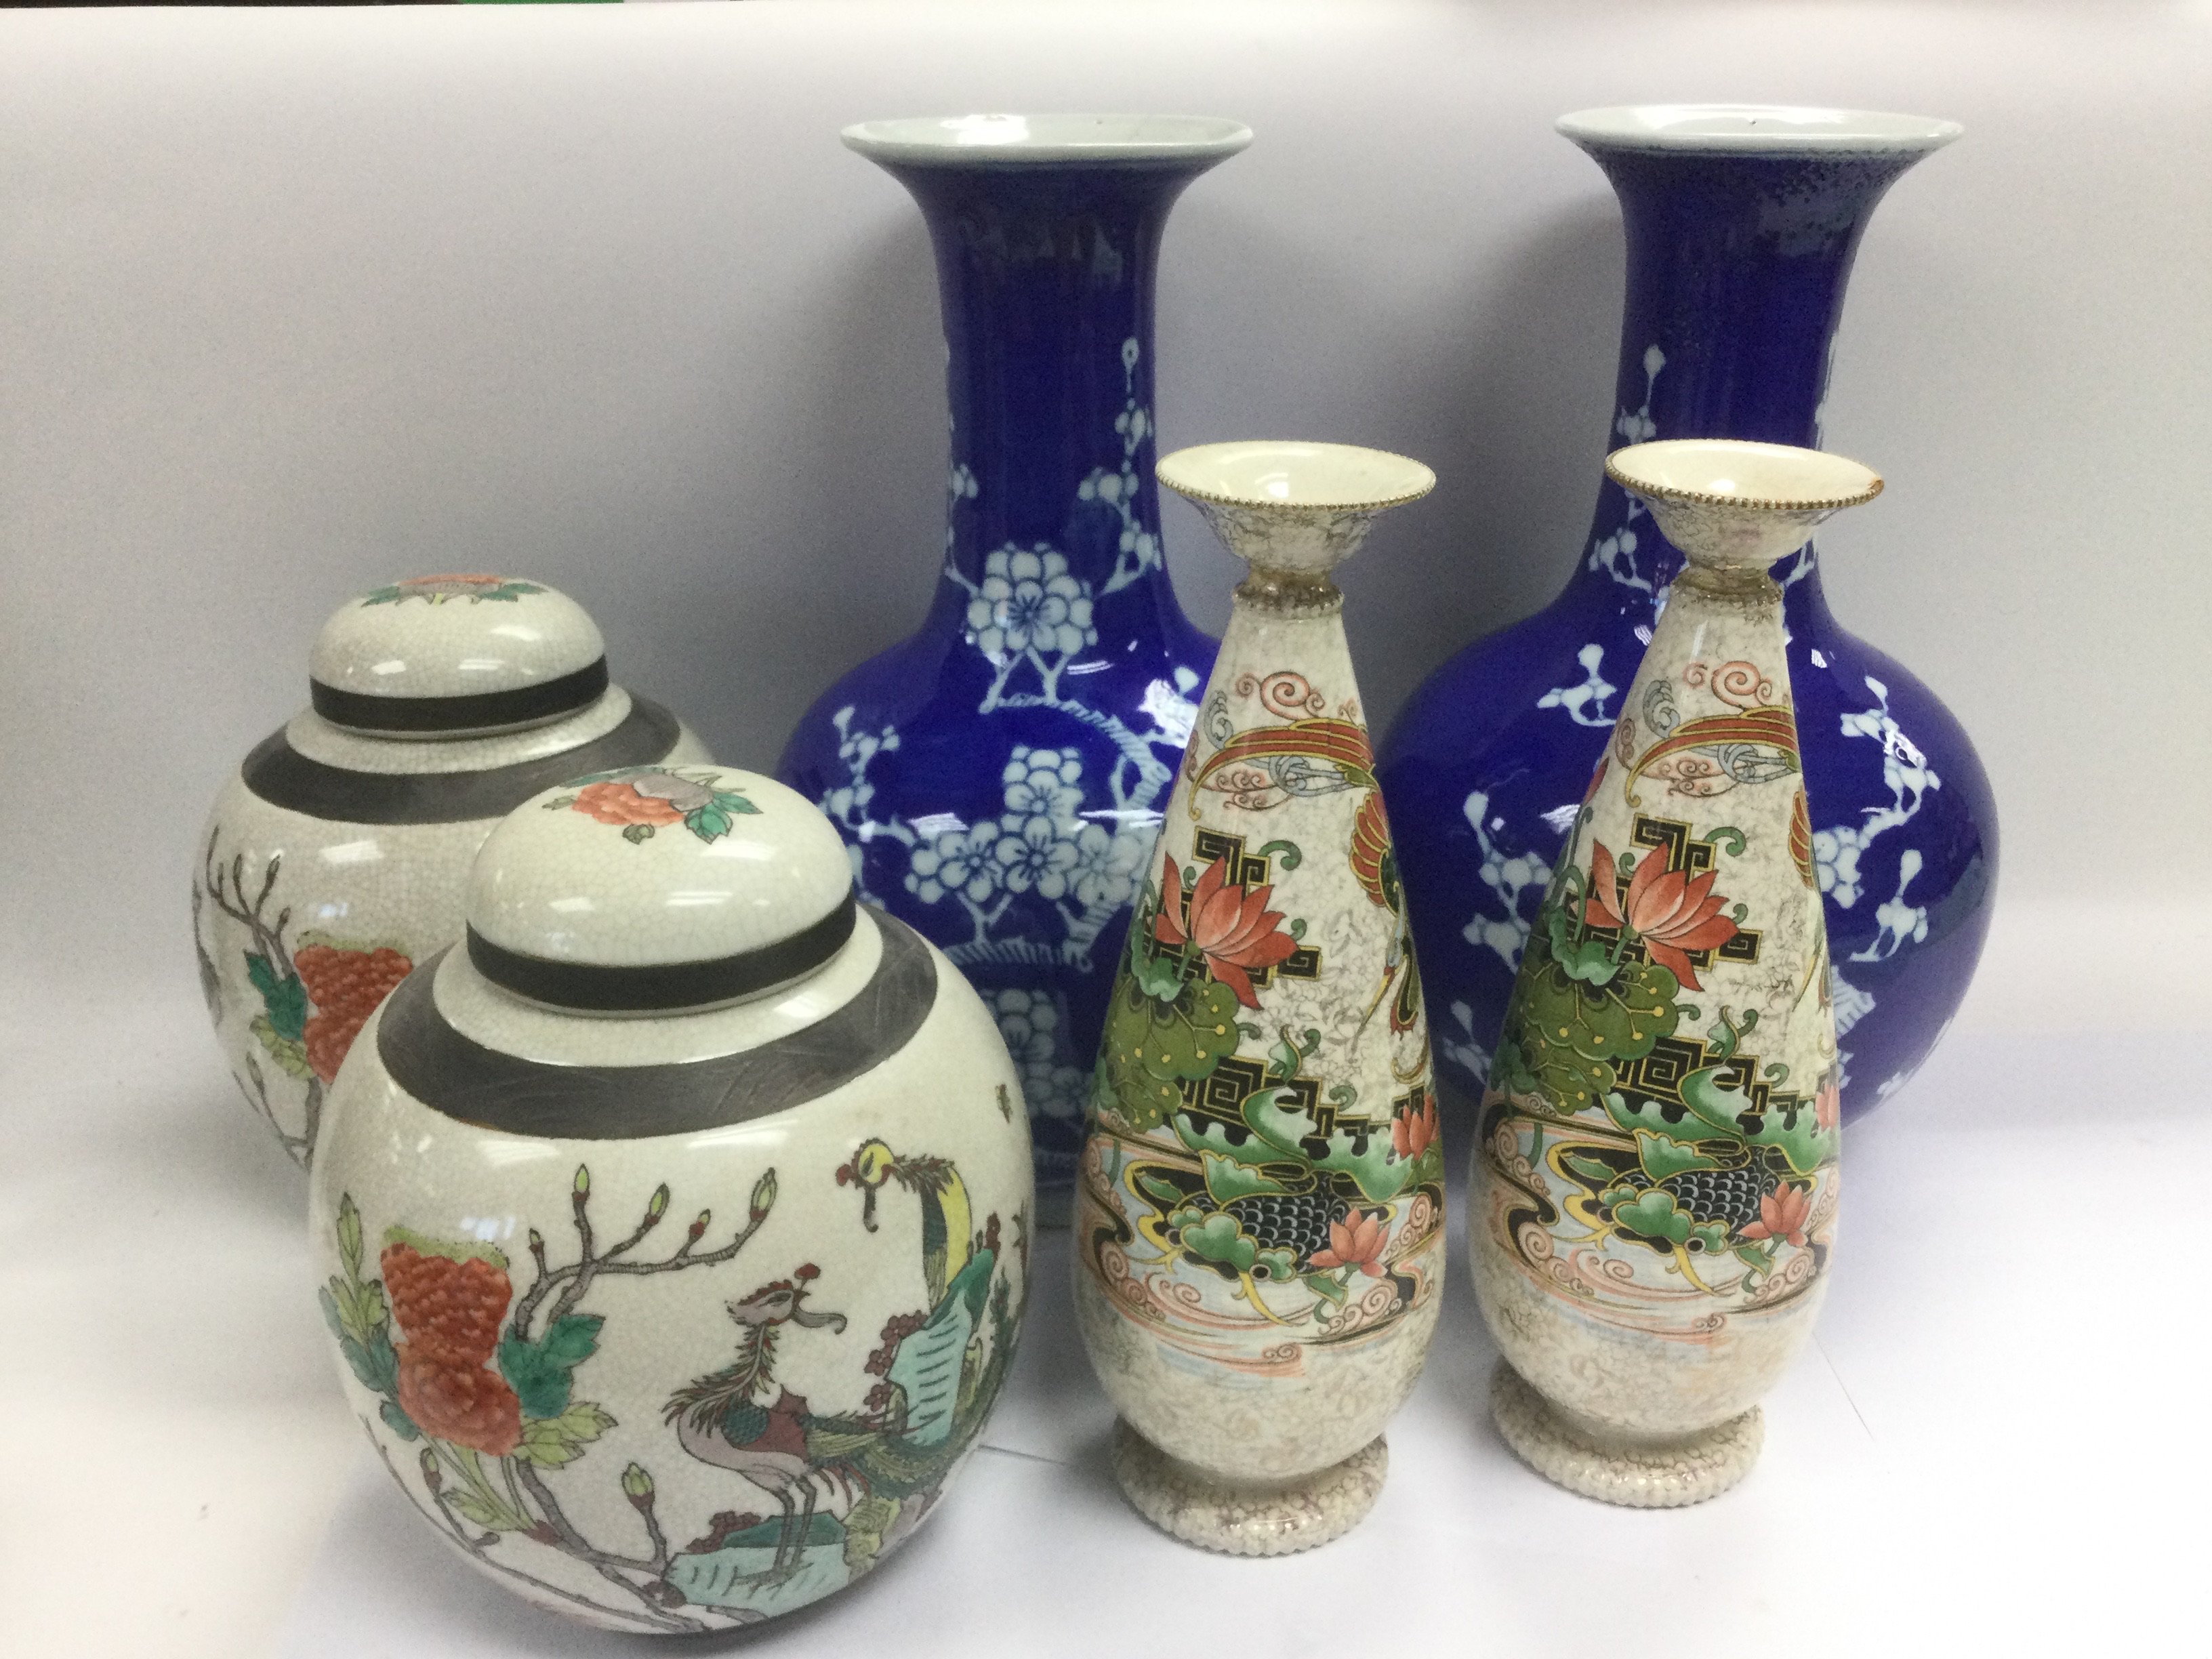 Three pairs of Oriental style vases comprising a pair of blue and white vases decorated with